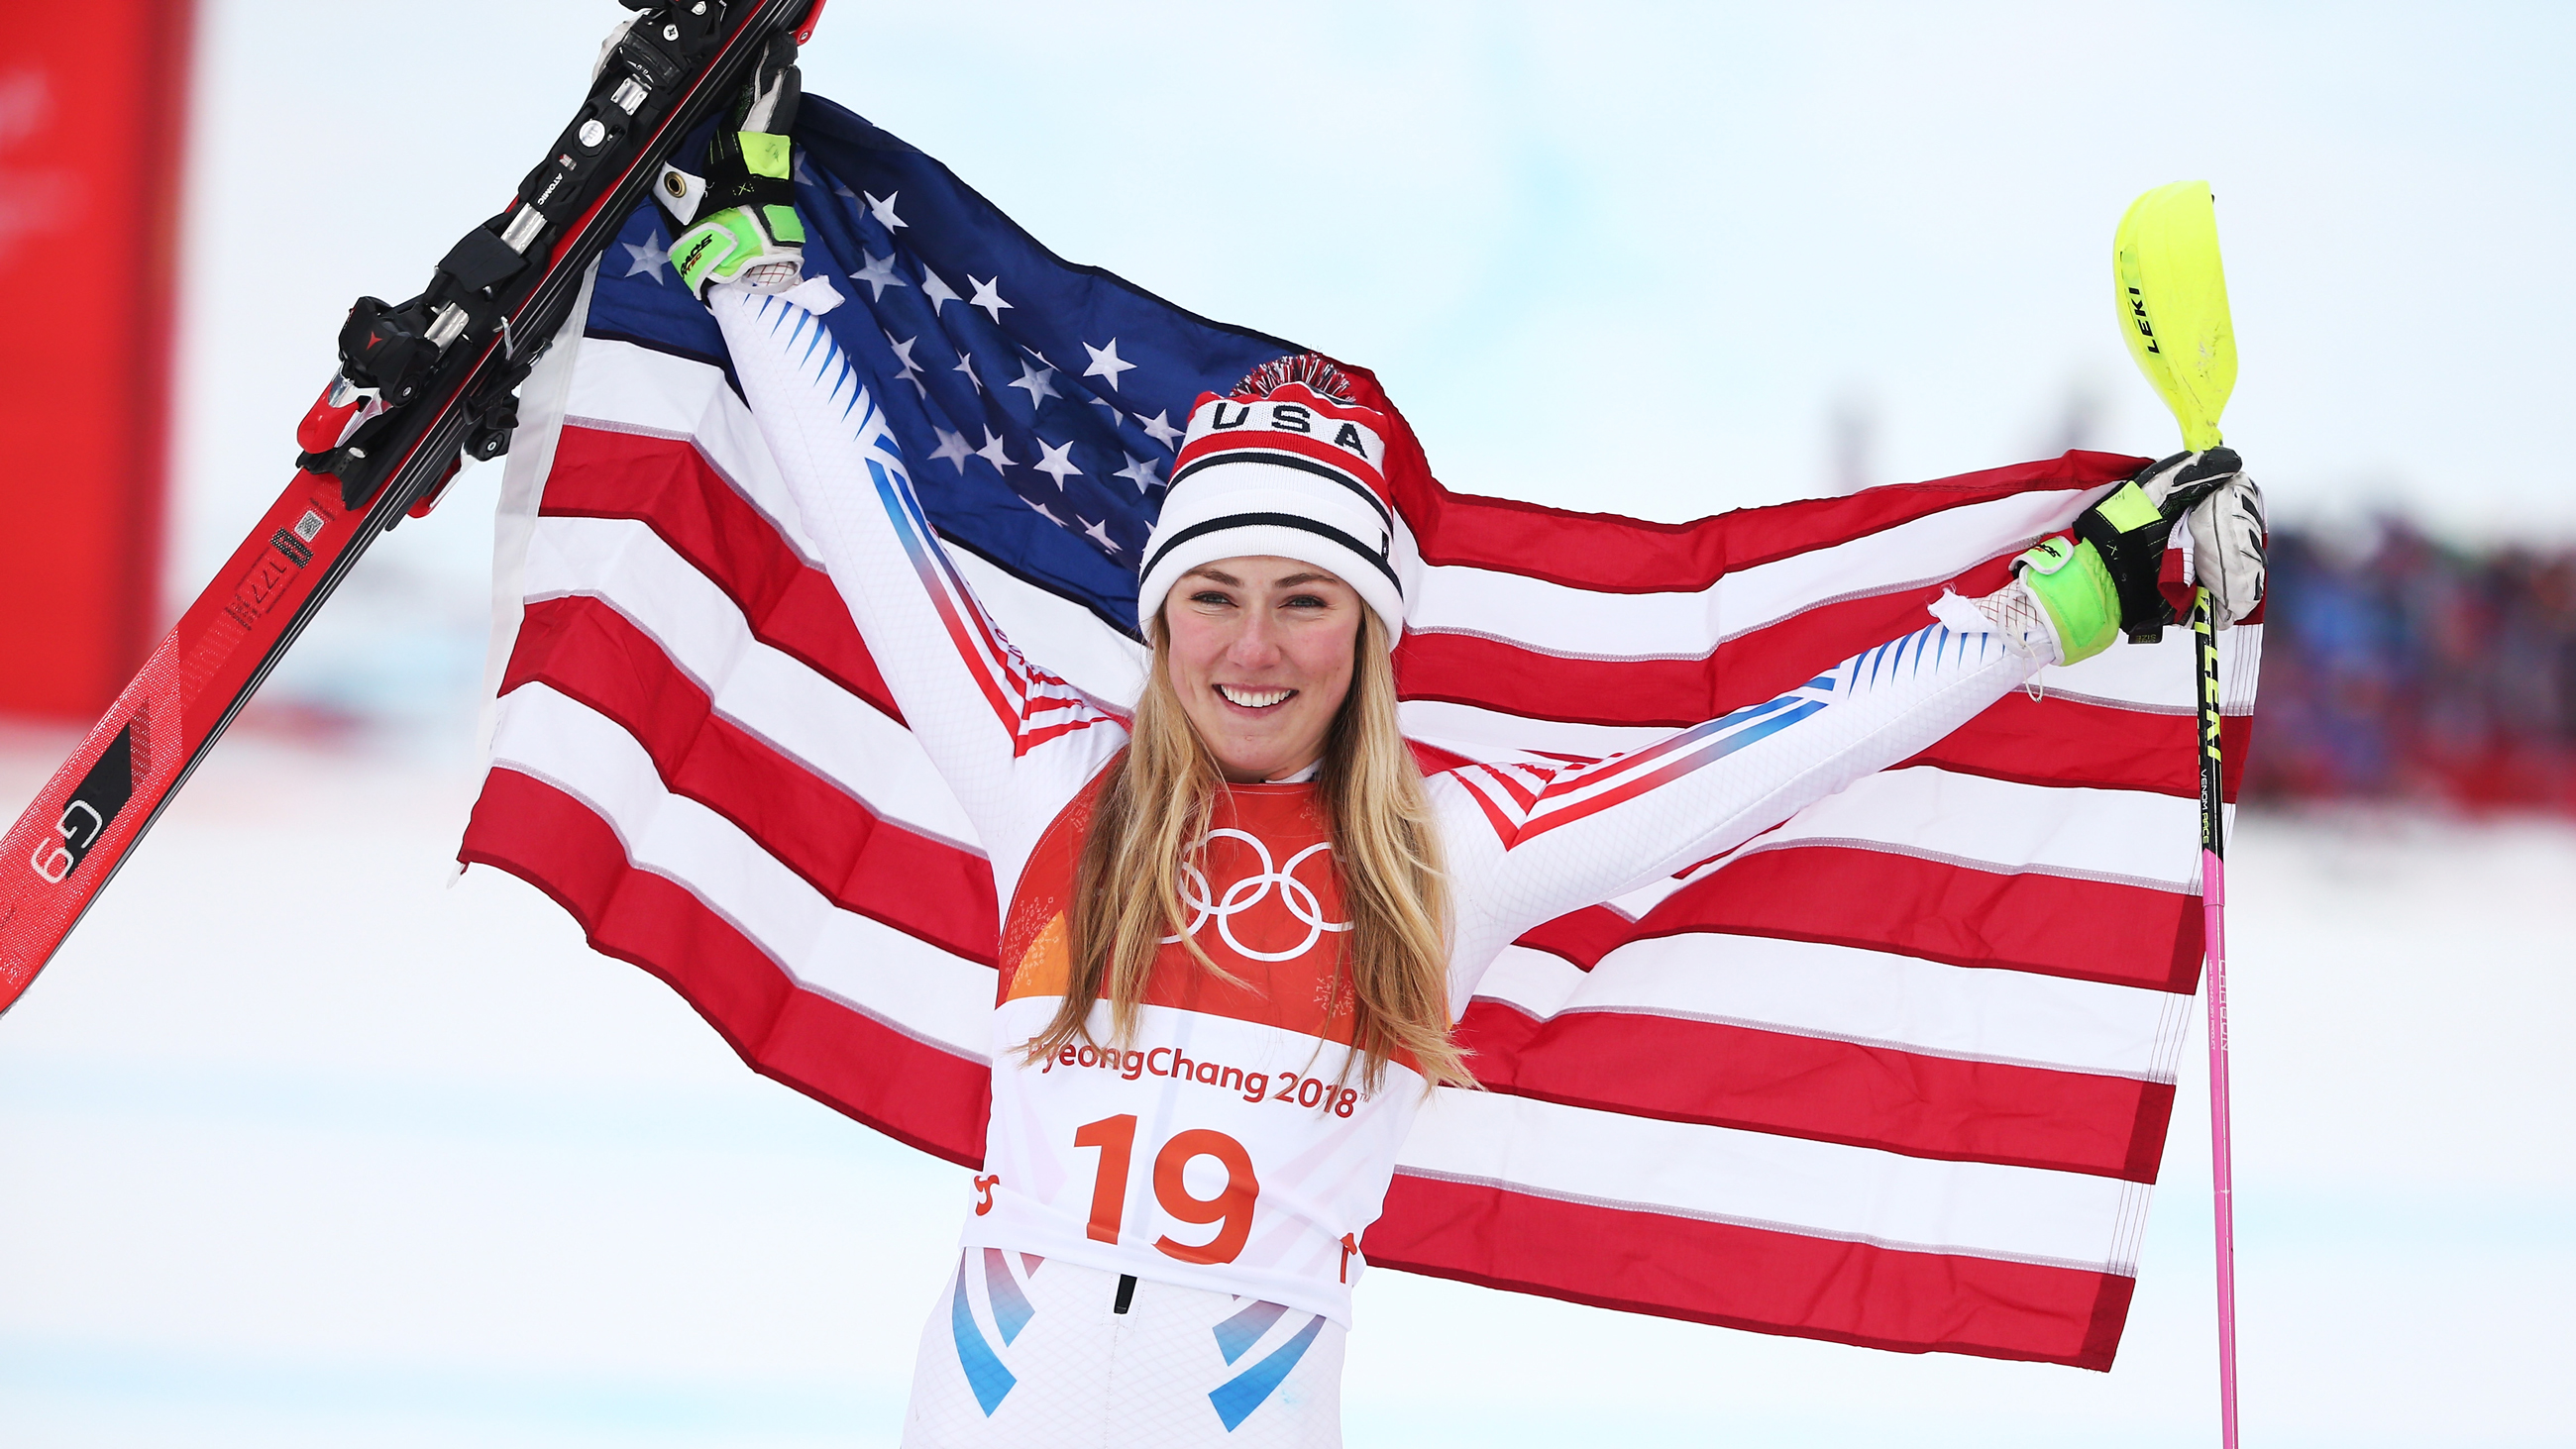 Mikaela Shiffrin celebrates her silver medal in alpine combined Thursday at the 2018 Olympic Winter Games. (Getty Images - Dan Istitene)